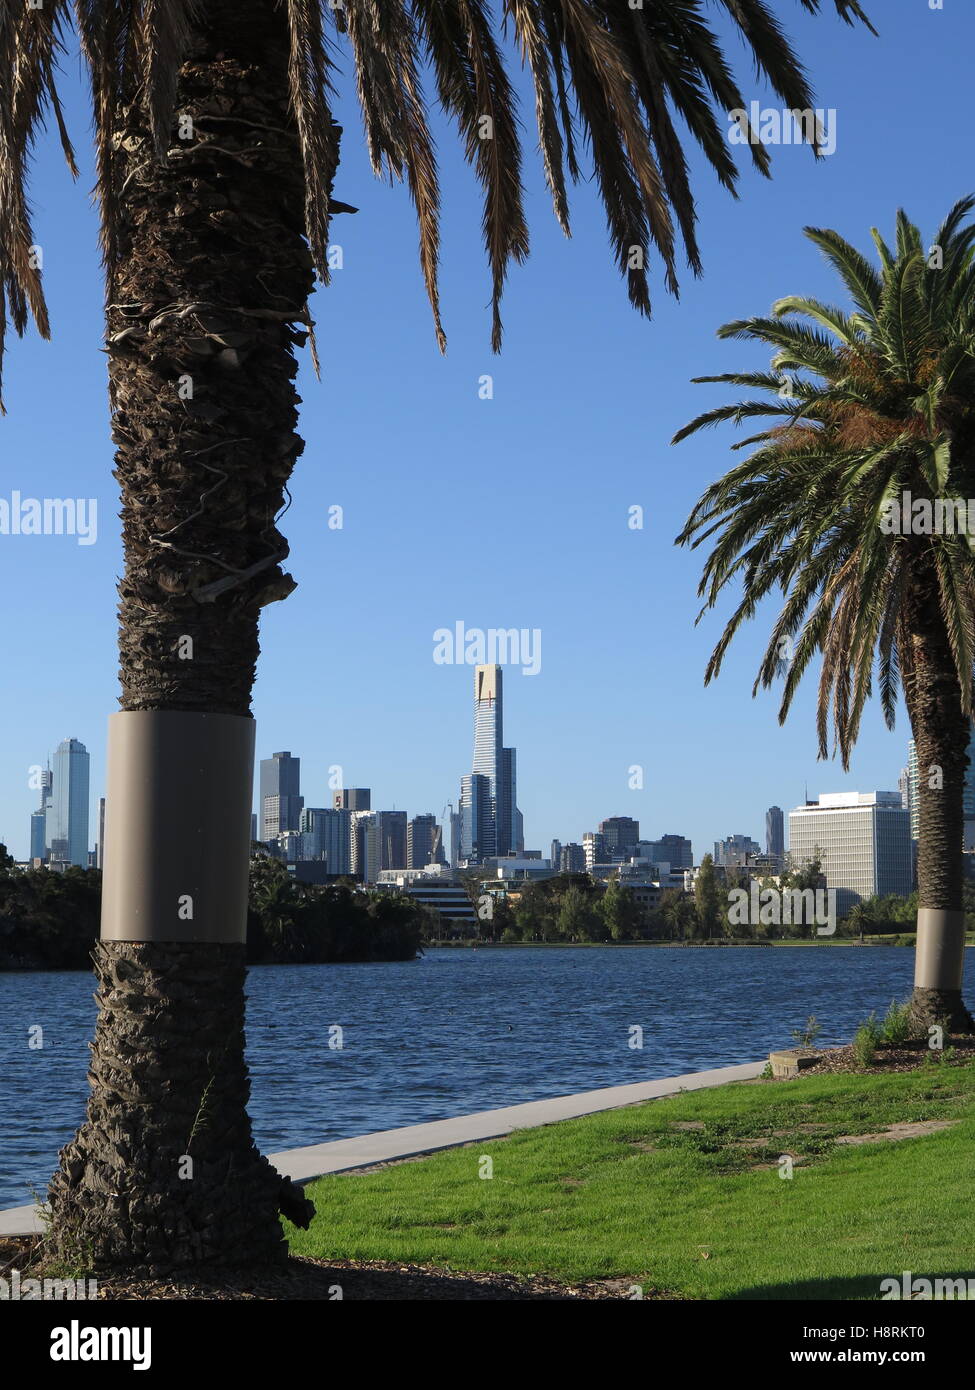 View of the City of Melbourne, Australia, looking across the lake in Albert Park. Stock Photo